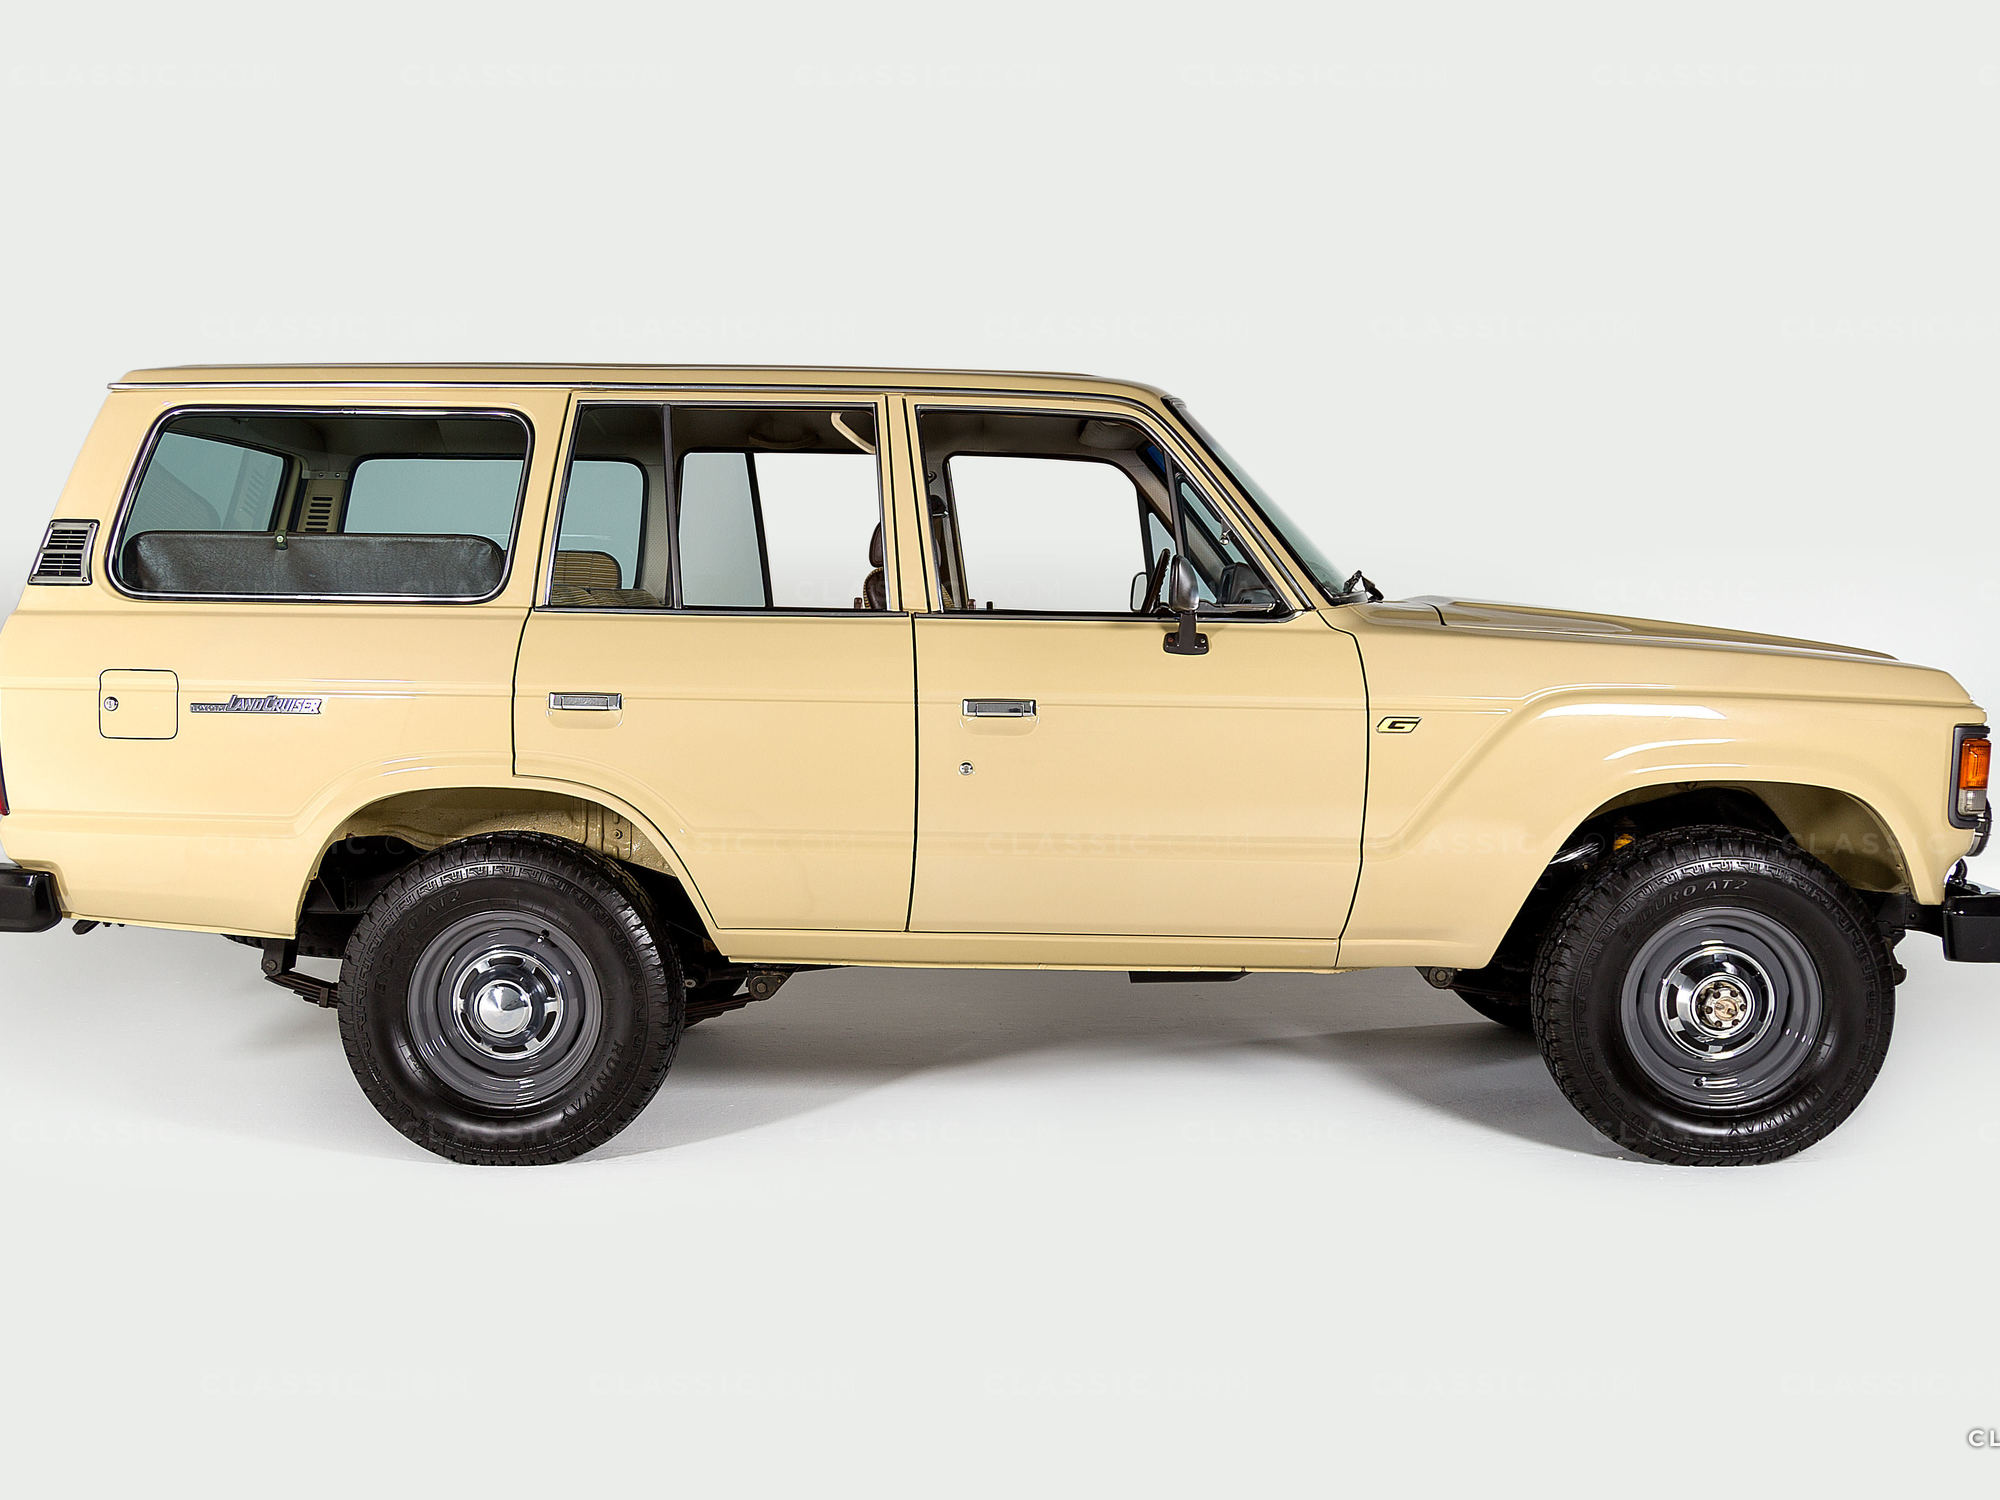 Incredibly well preserved FJ60